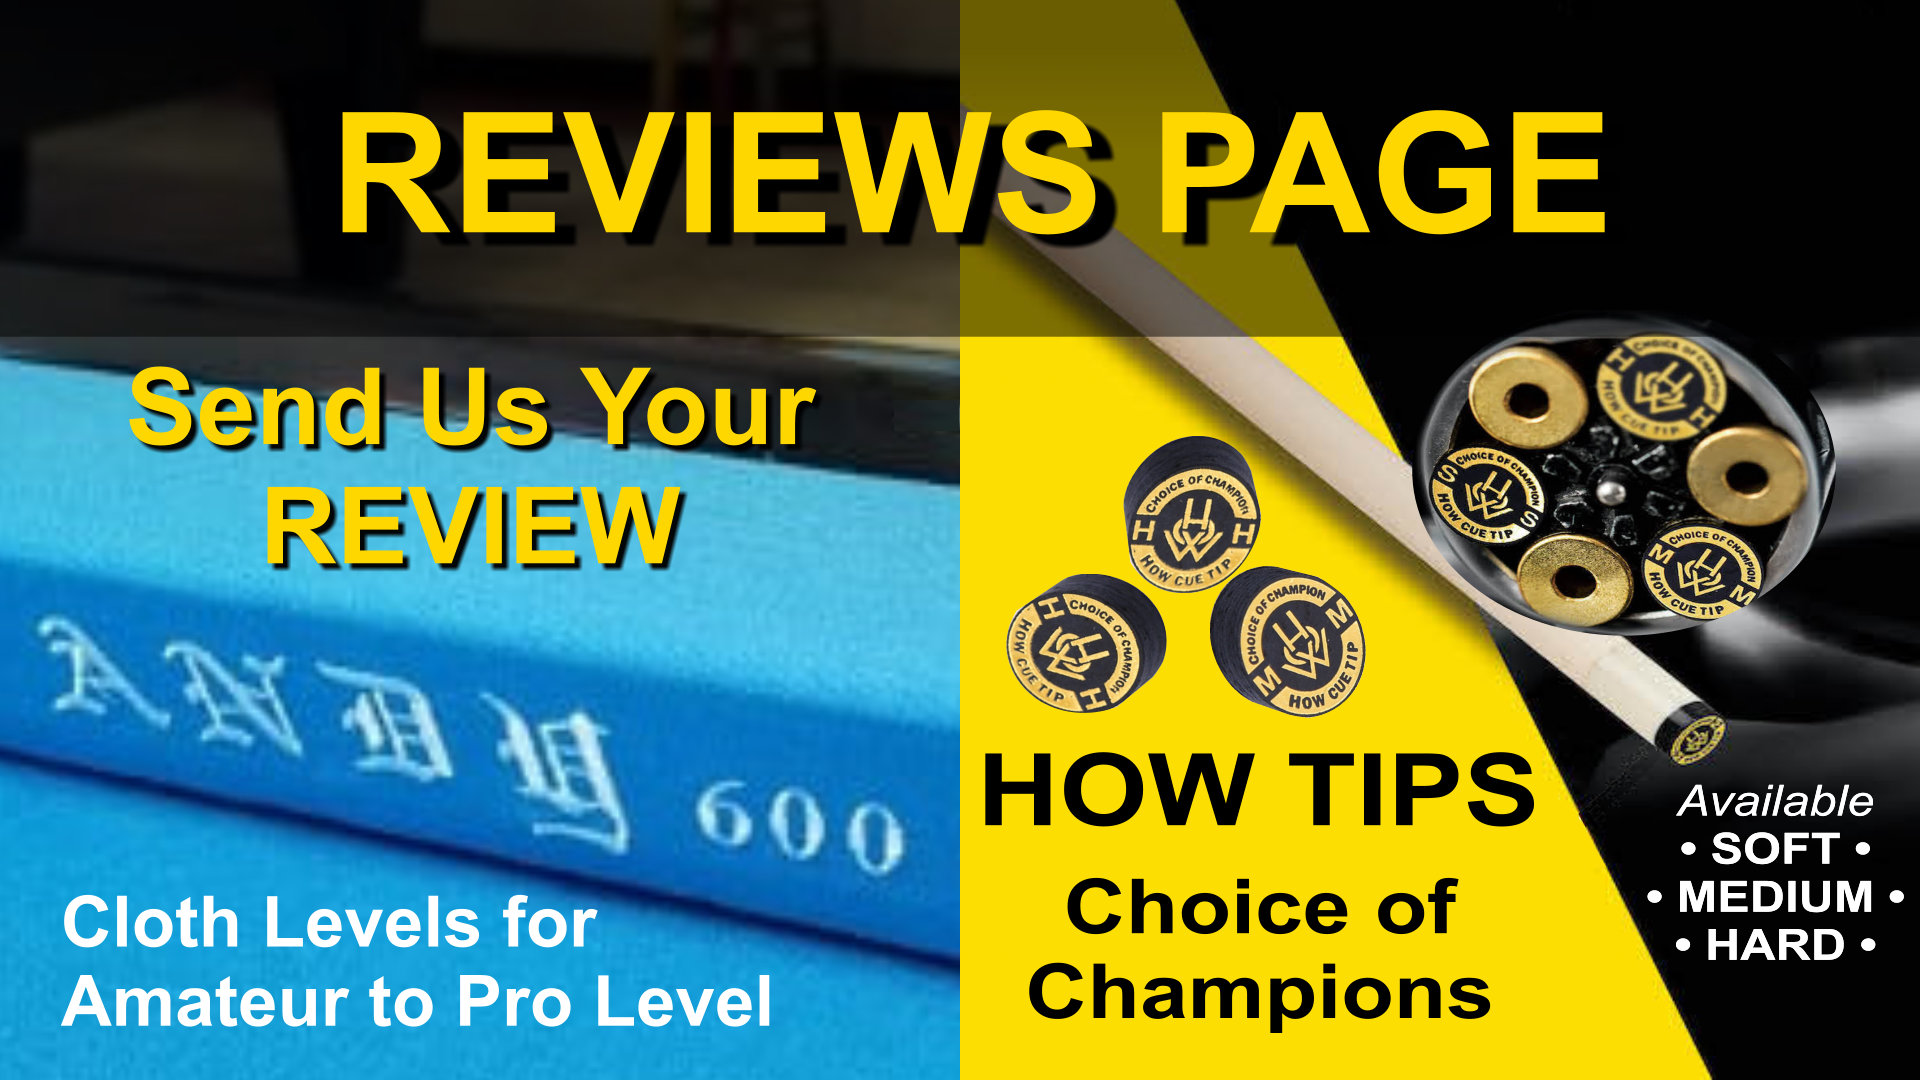 eastern billiards reviews page graphic